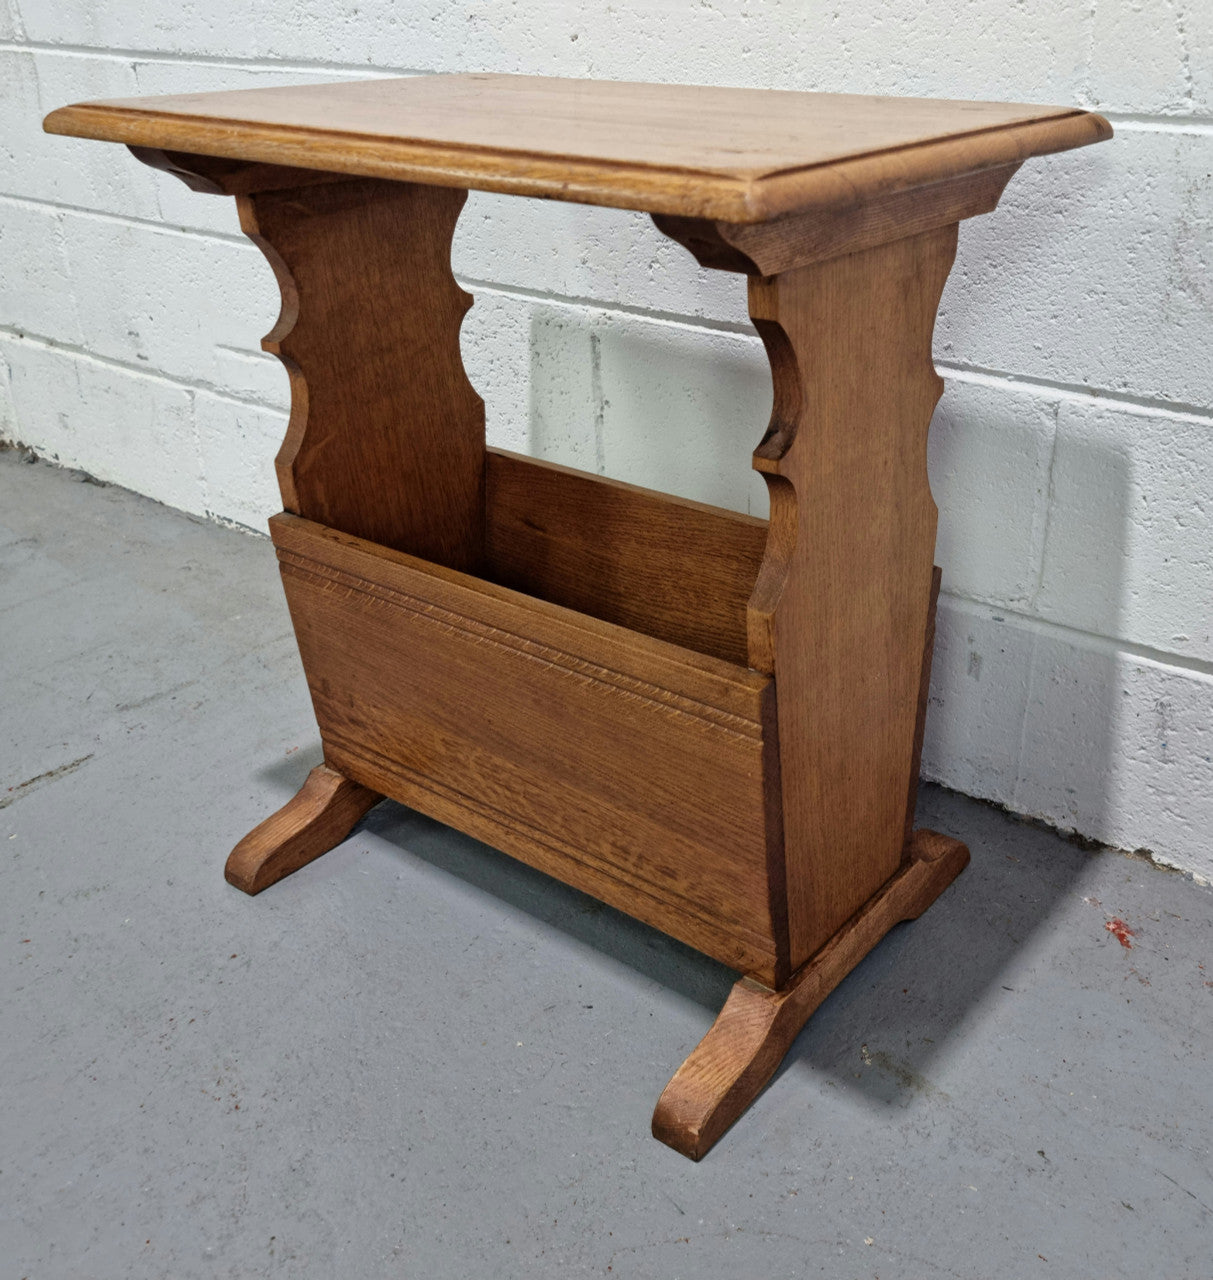 Arts & Crafts style magazine / newspaper rack side table. In very good original detailed condition.